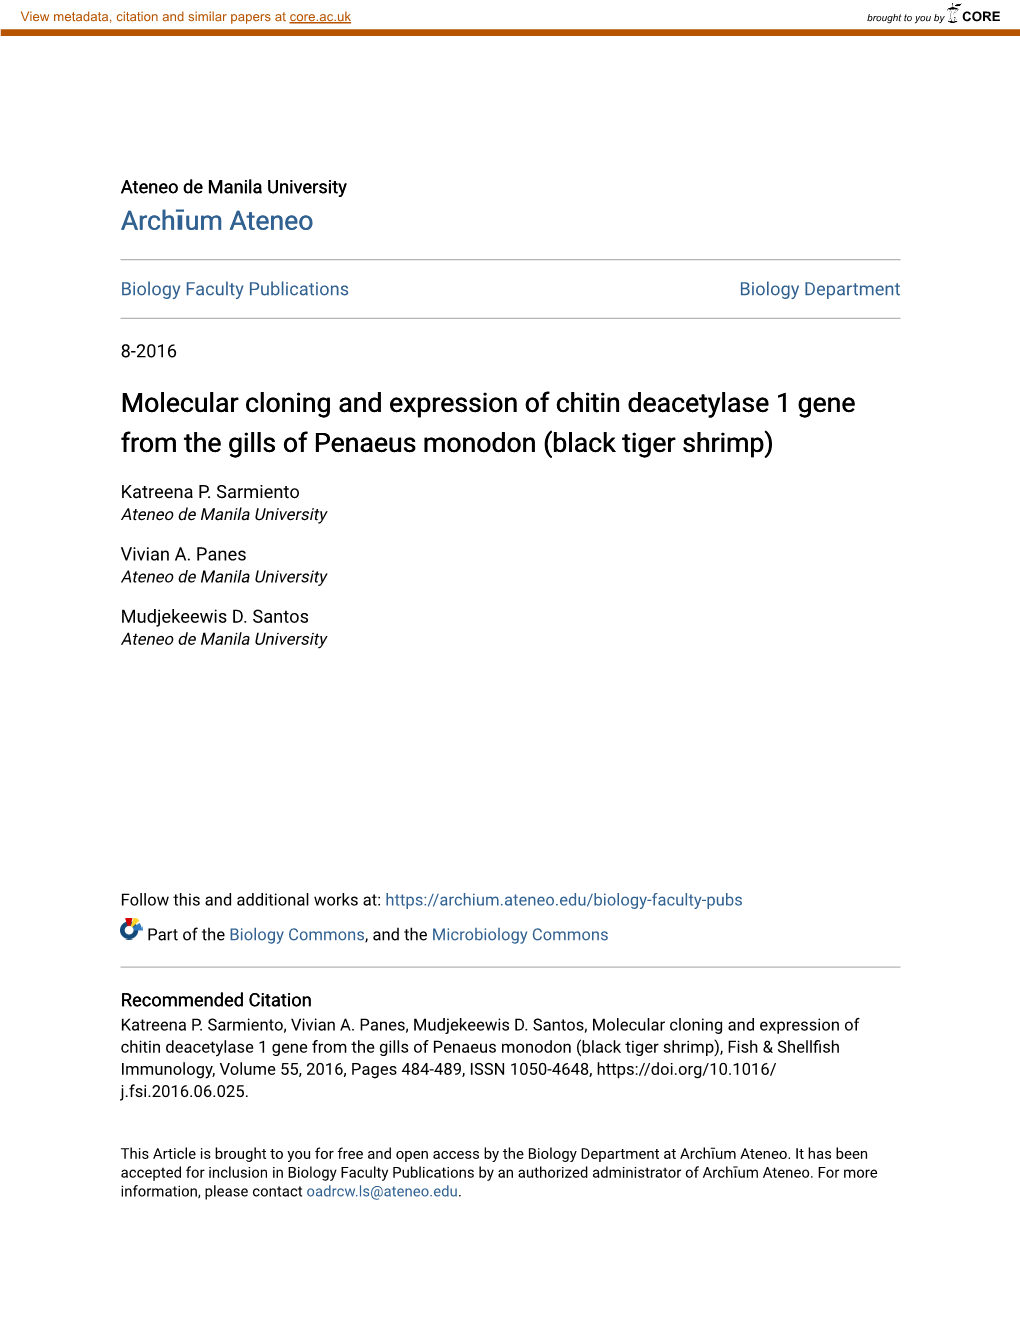 Molecular Cloning and Expression of Chitin Deacetylase 1 Gene from the Gills of Penaeus Monodon (Black Tiger Shrimp)